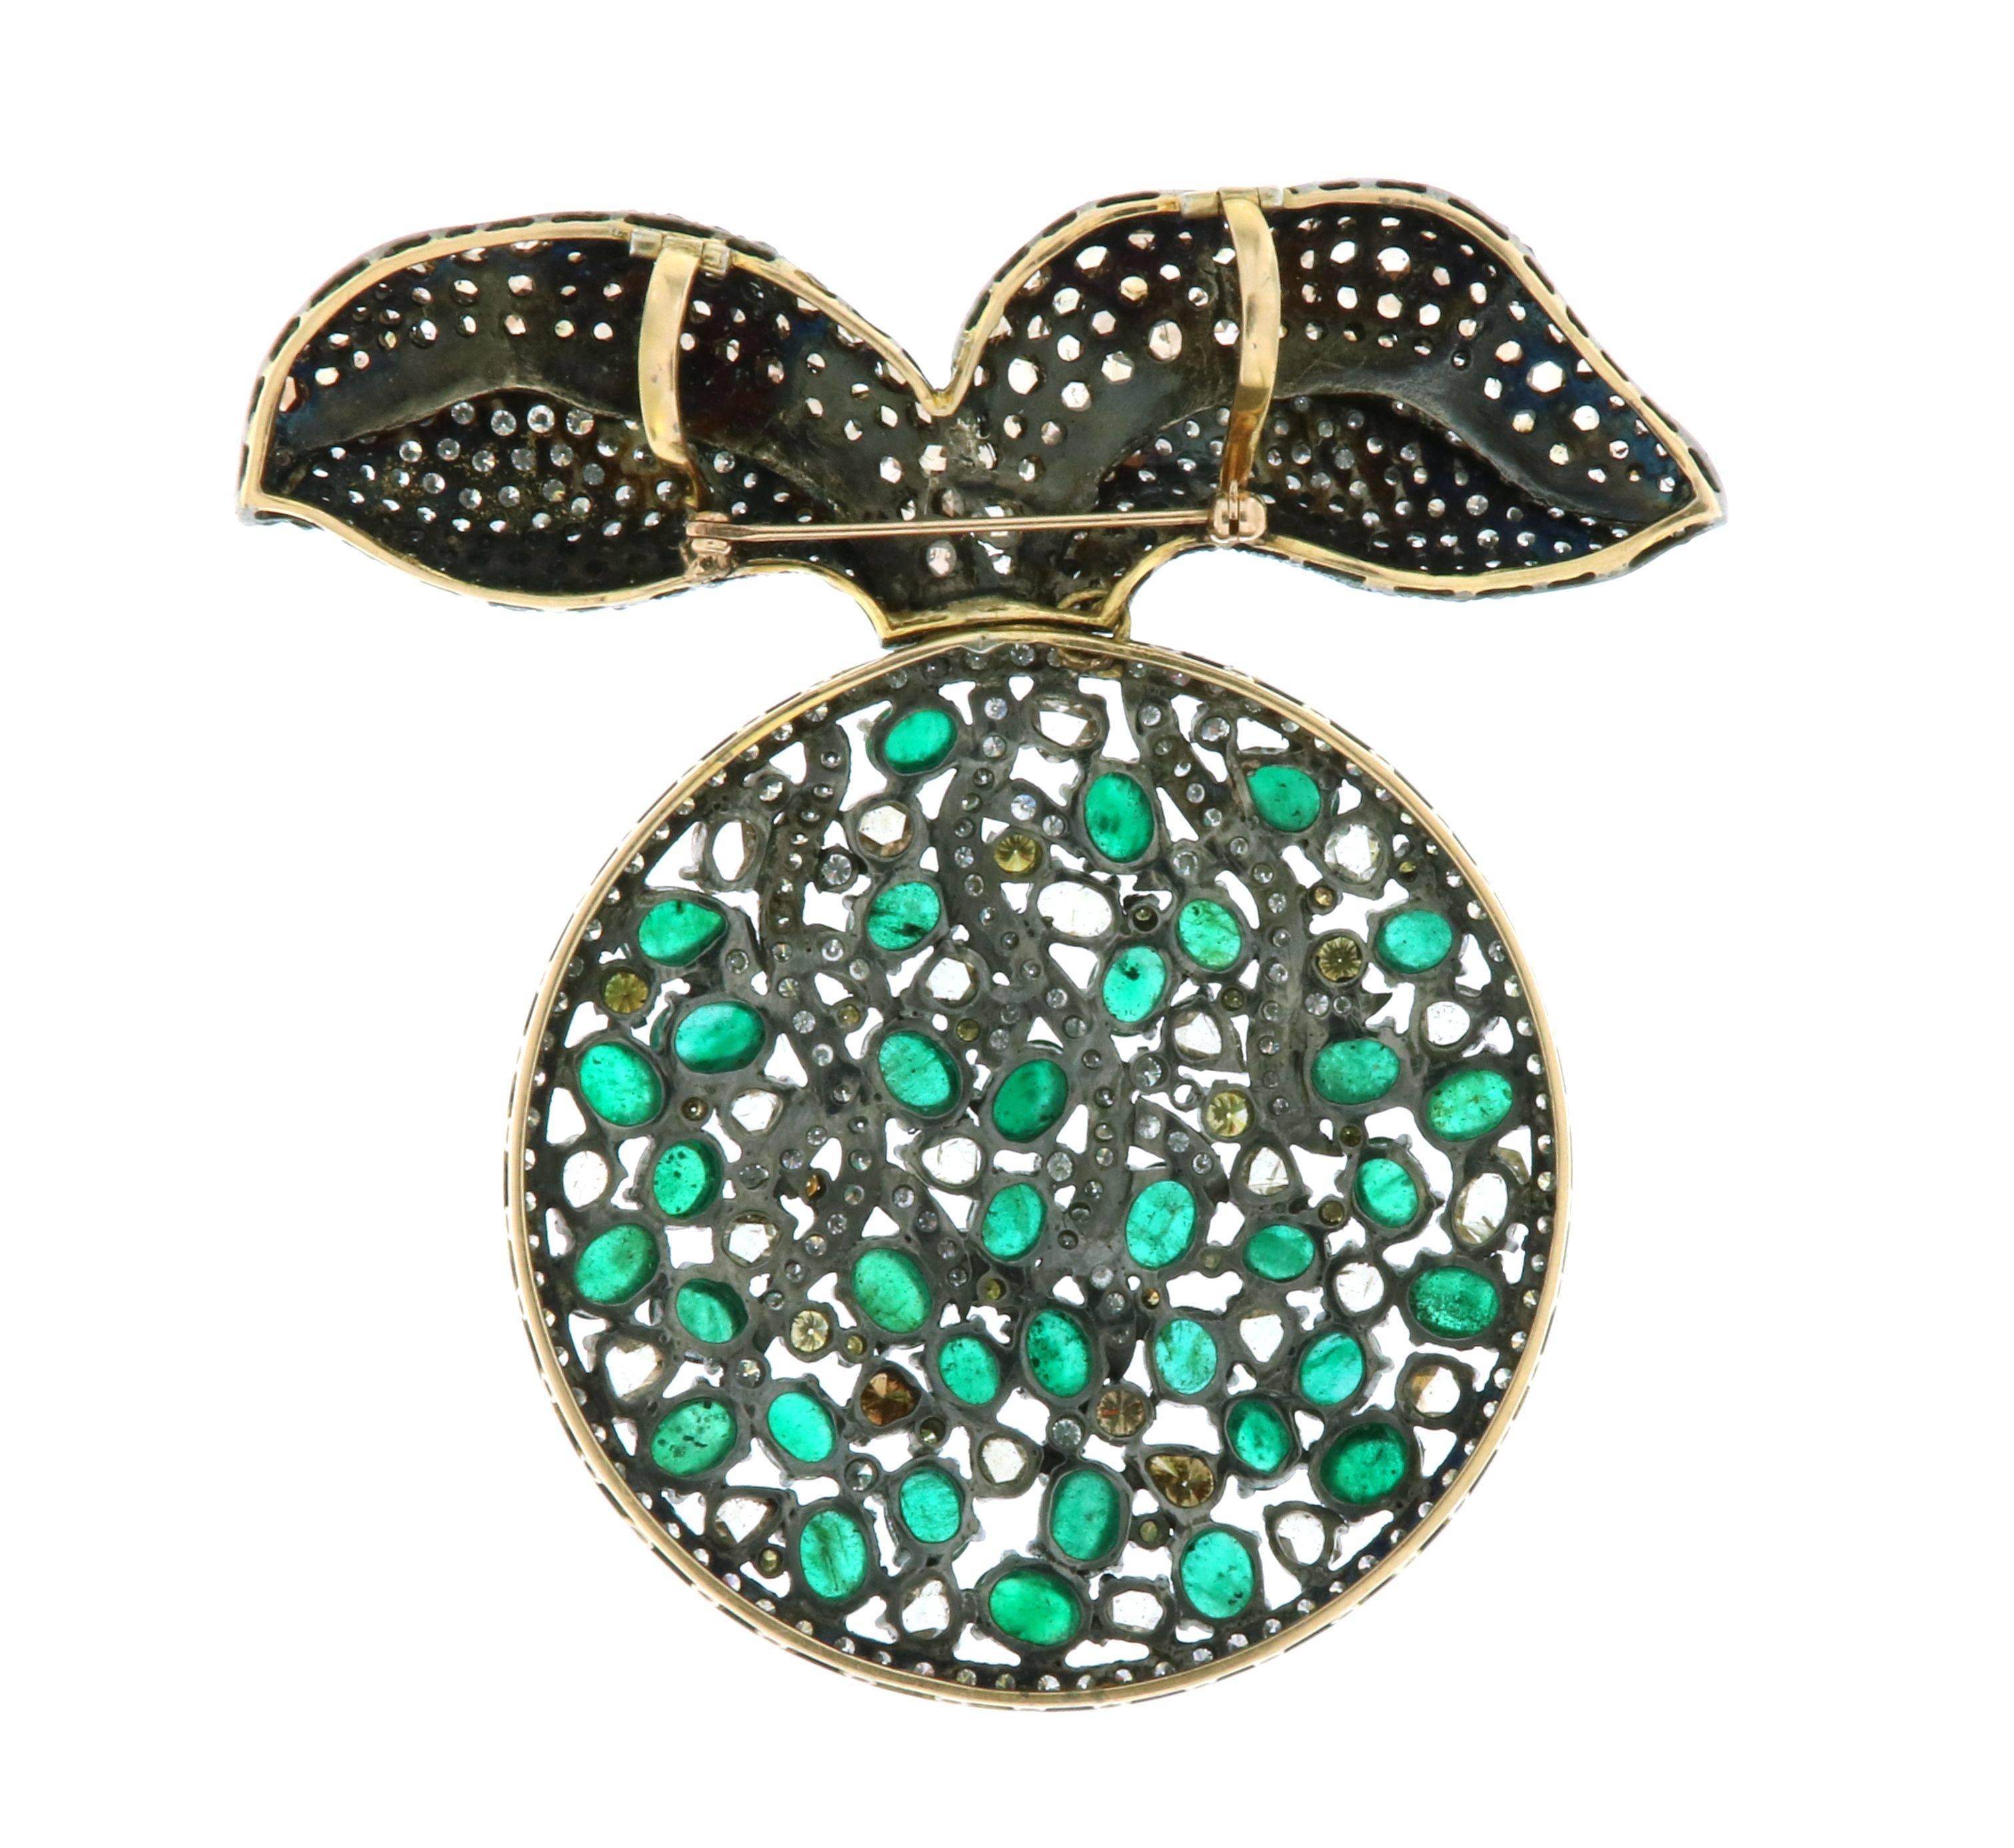 Super exotic looking Emerald and Diamond Brooch come Pendant. Add this to your collection and be ready to complimented everytime you wear this. This piece can be worn as a brooch and a pendant.

Diamond: 23.14CTS
EMERALD: 30CTS